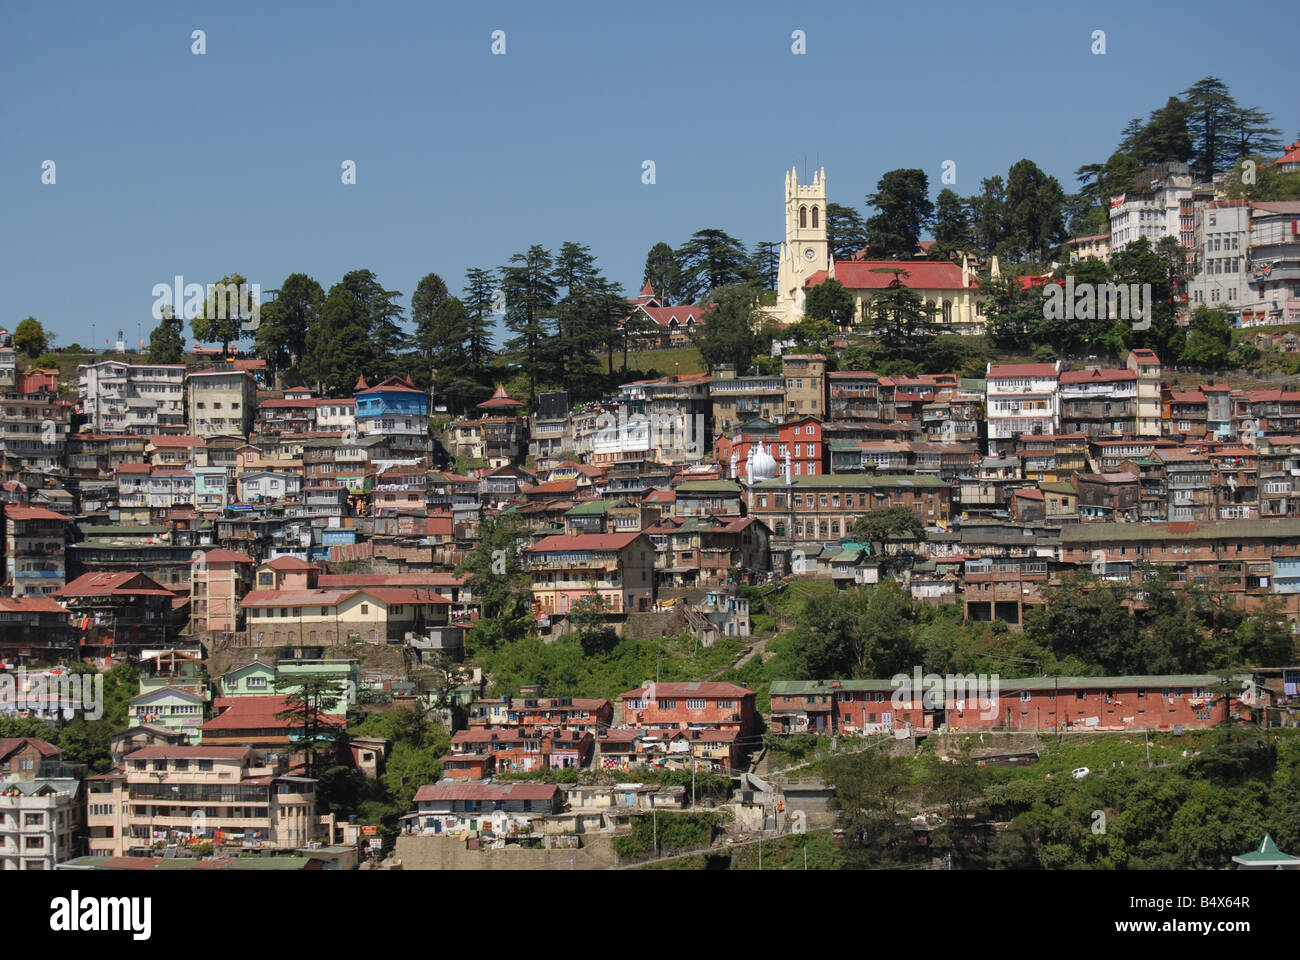 A View of Simla (Shimla), a Hill Station in North India from the High Court with Christ Church forming the Focus Stock Photo